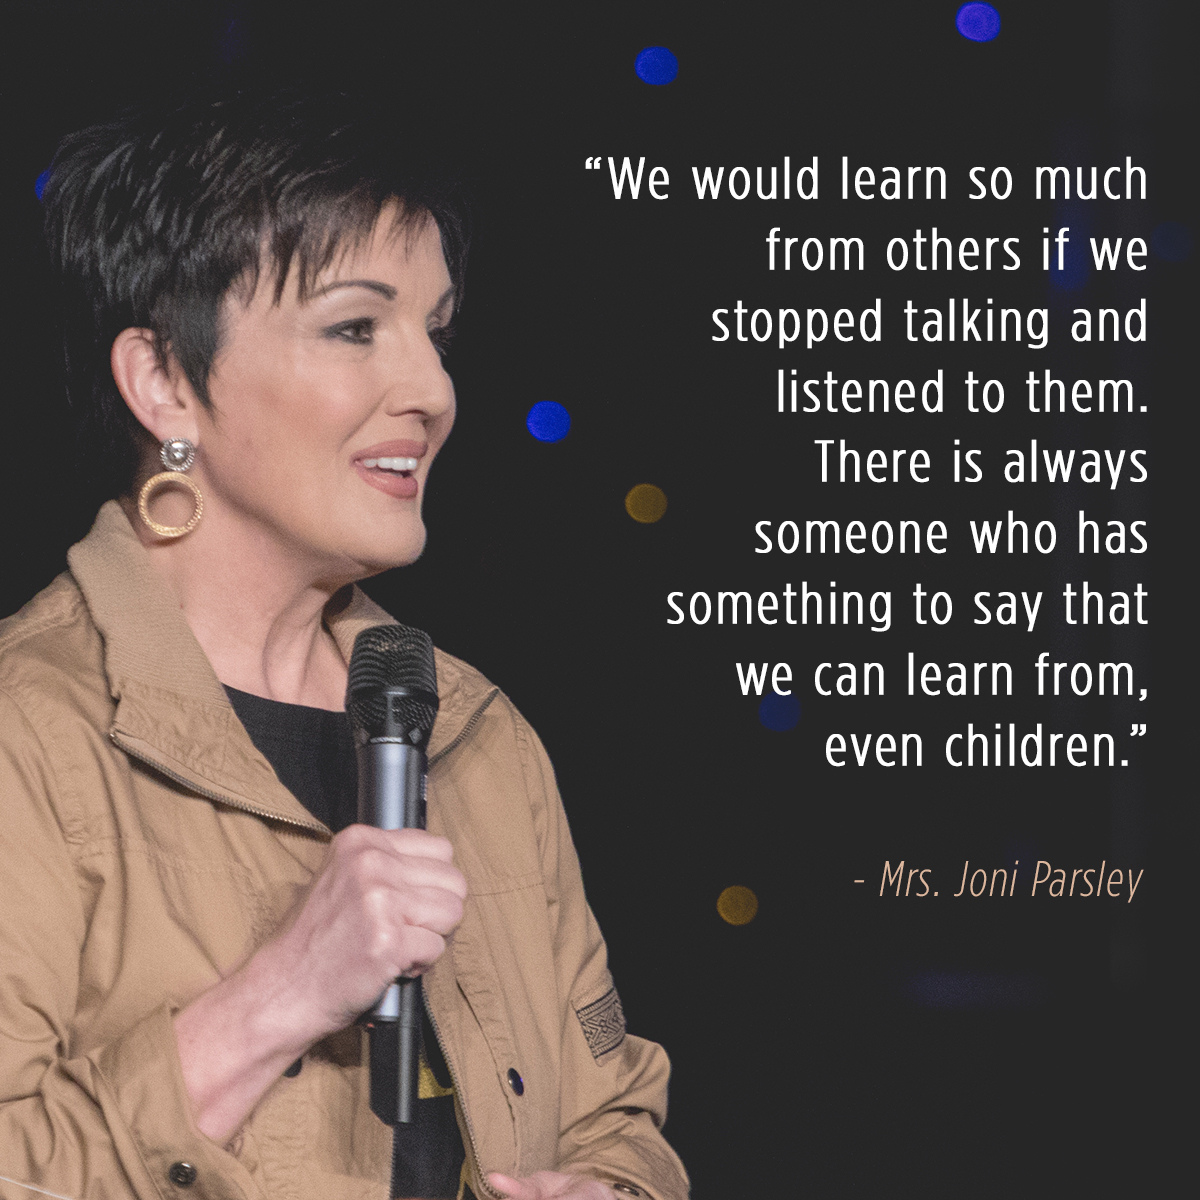 “We would learn so much from others if we stopped talking and listened to them. There is always someone who has something to say that we can learn from, even children.” – Mrs. Joni Parsley